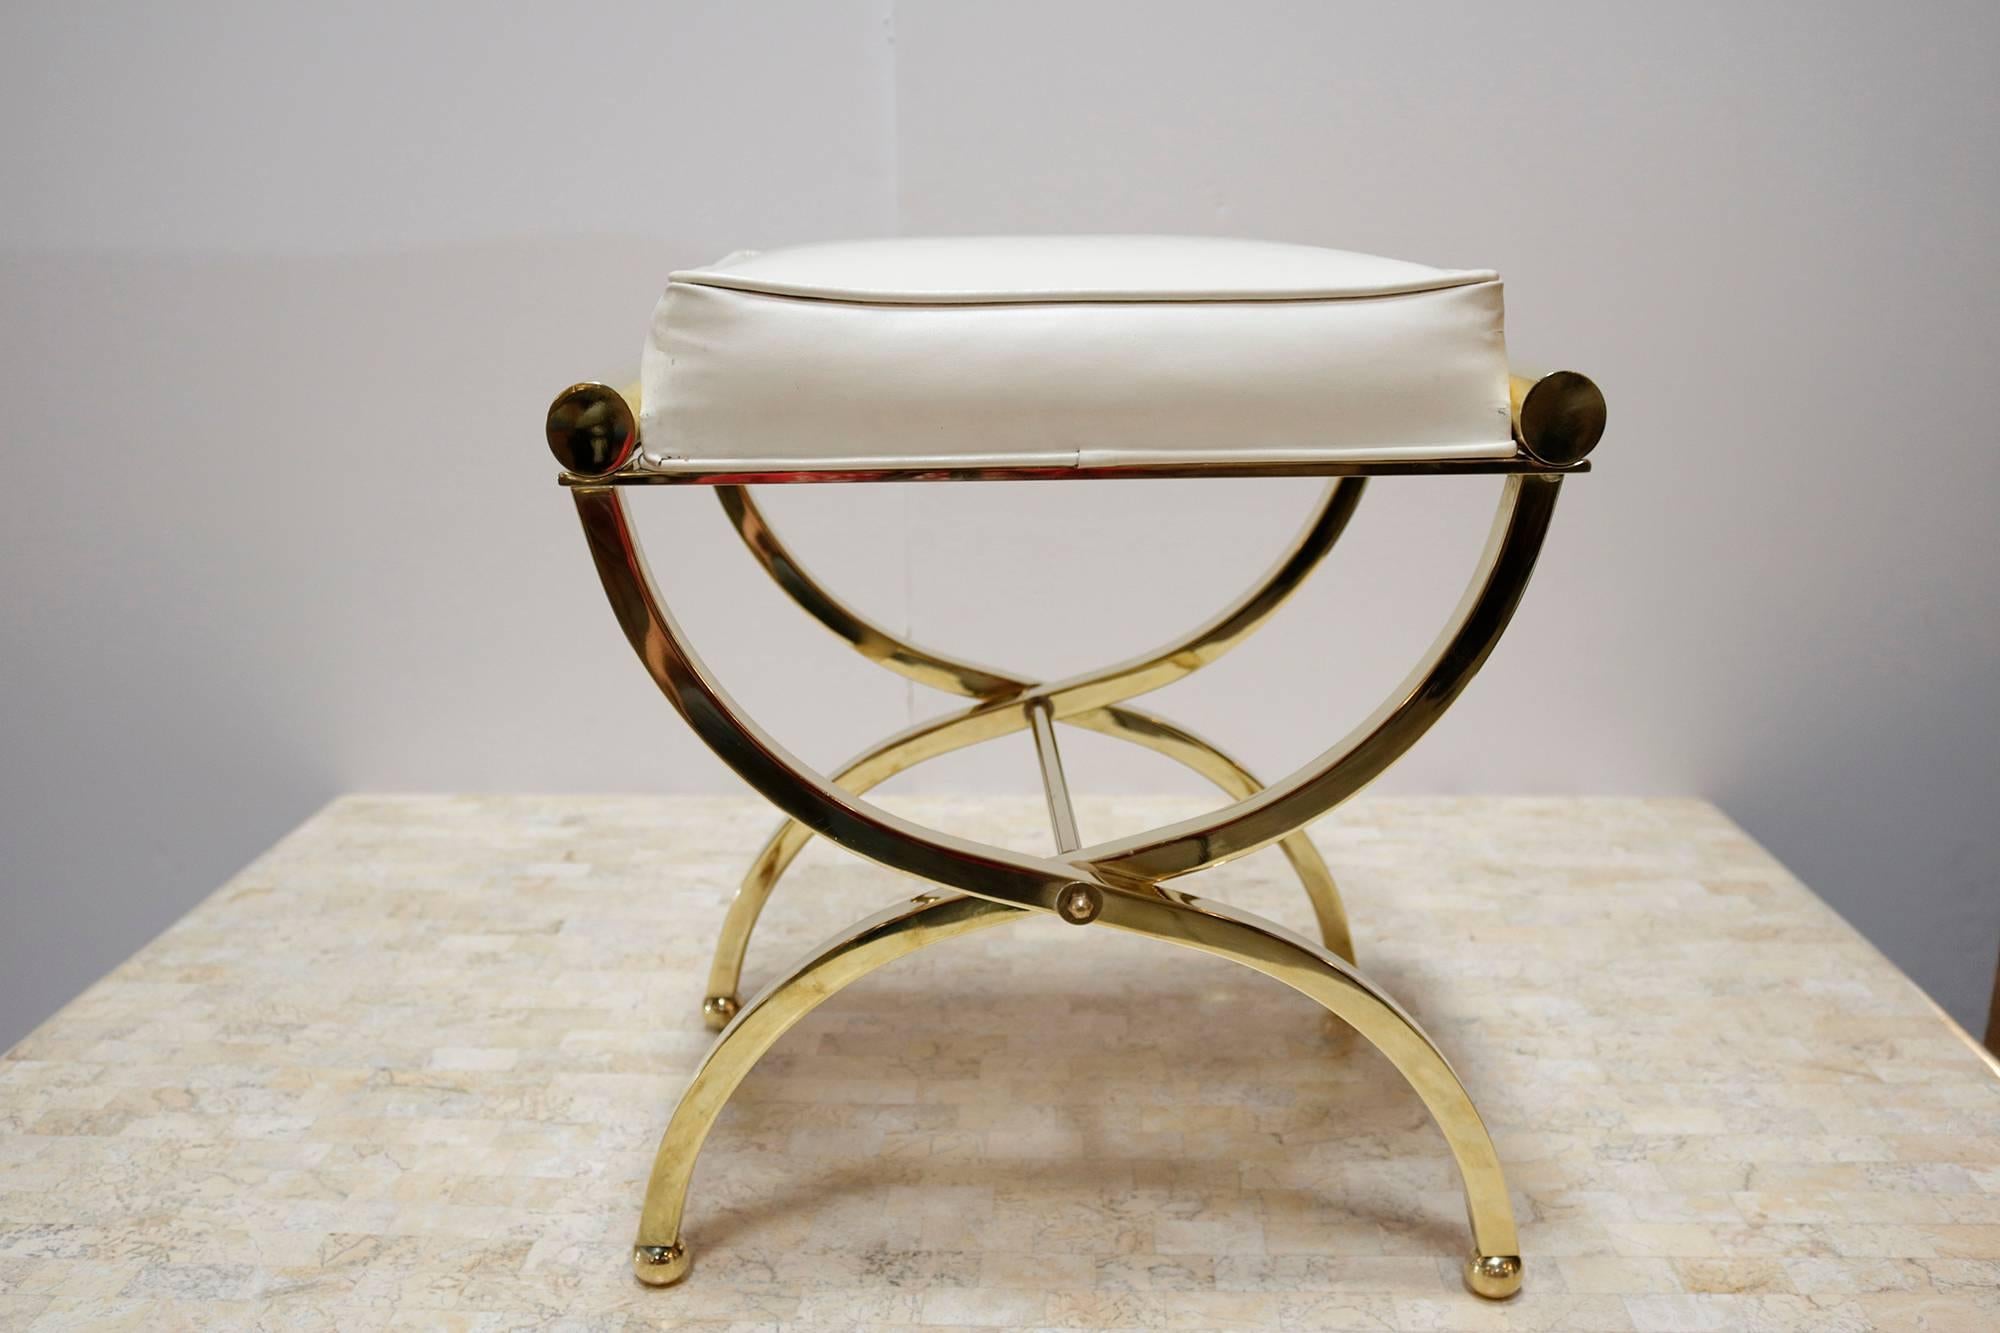 Charles Hollis Jones is an American artist and furniture designer who is recognized by the Smithsonian Institution for his pioneering use of acrylic and Lucite. This brass "Arnez" bench is from the Ball line - named after Lucille Ball